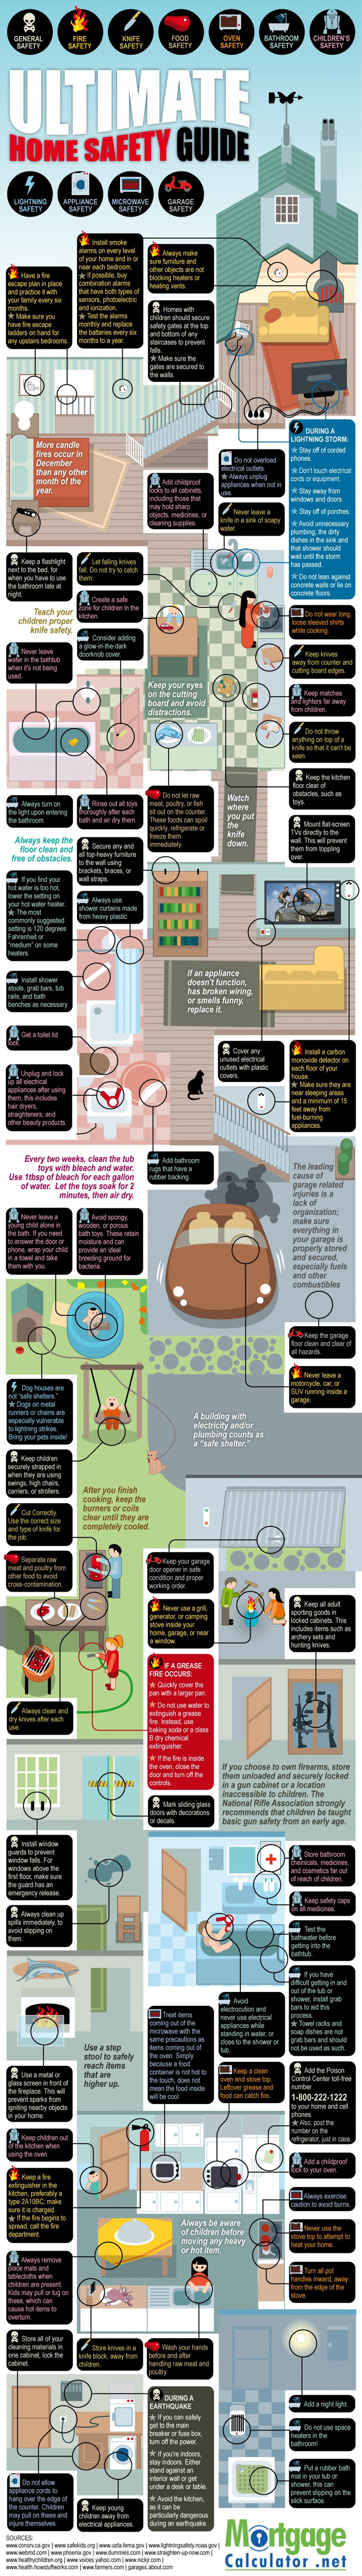 The Ultimate Guide To Home Safety [infographic]